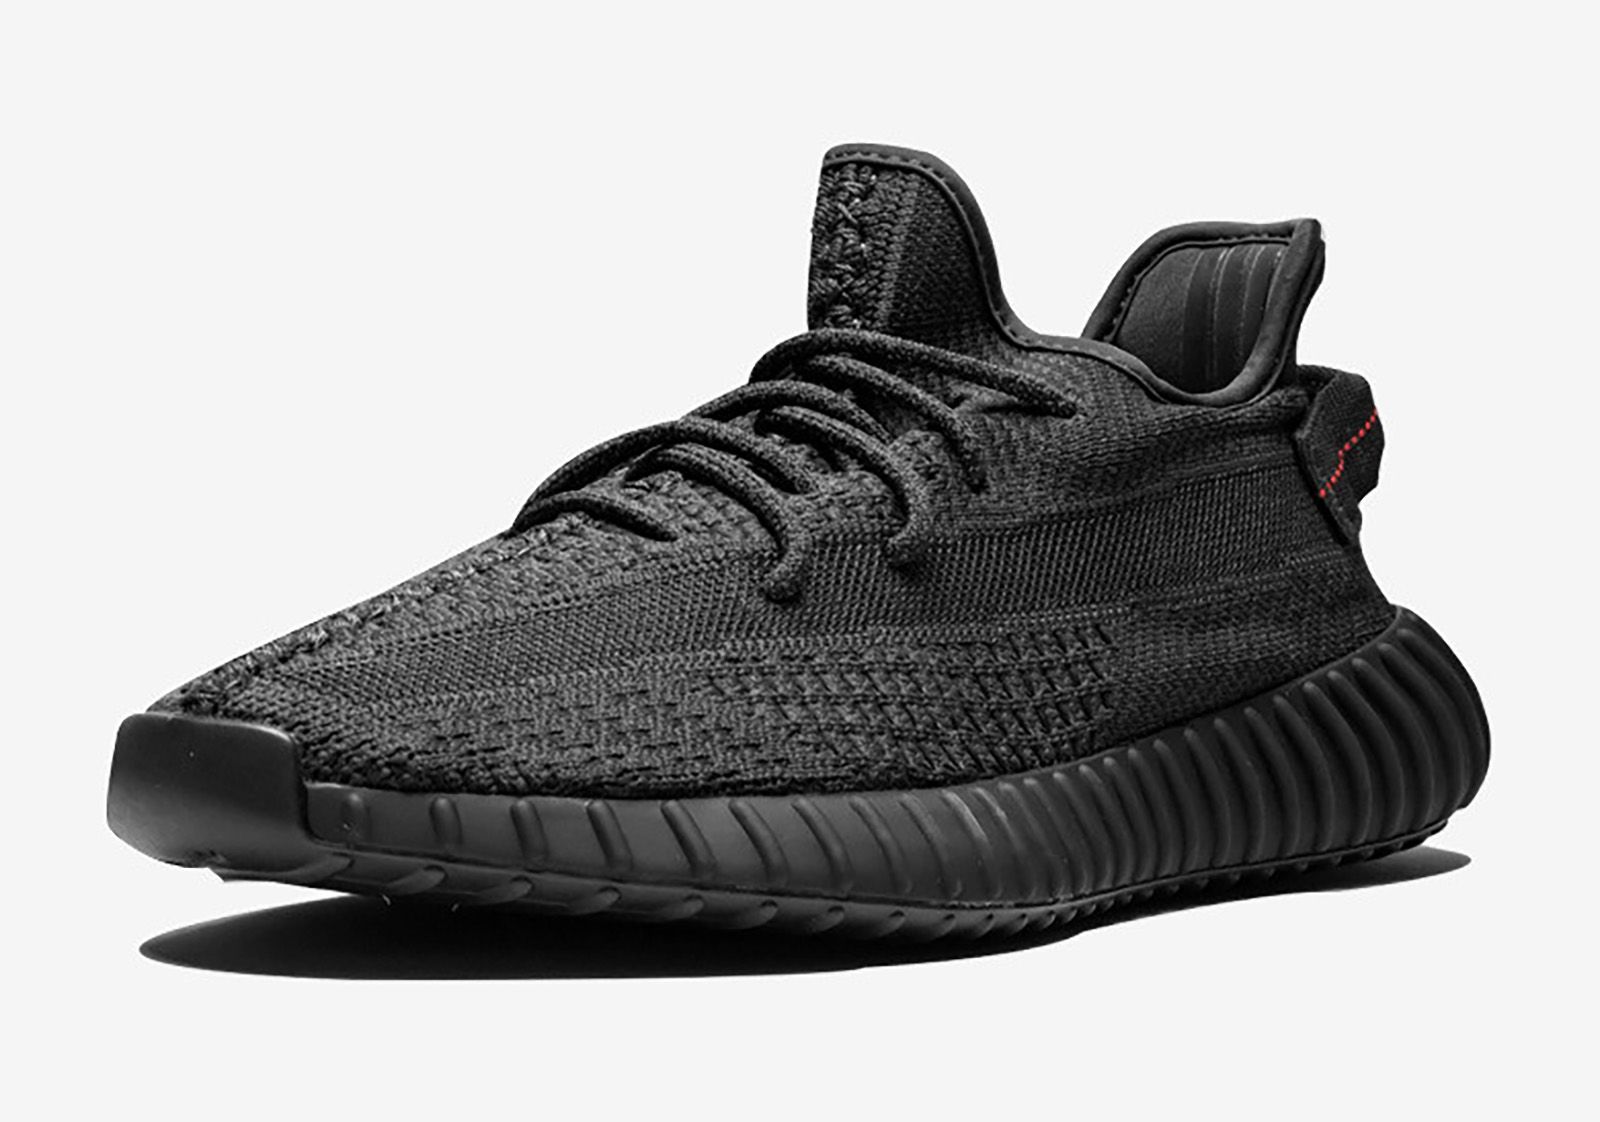 Circunferencia gato ellos Adidas Yeezy Boost 350 V2: Shoppers line up for new Kanye West sneaker | CNN